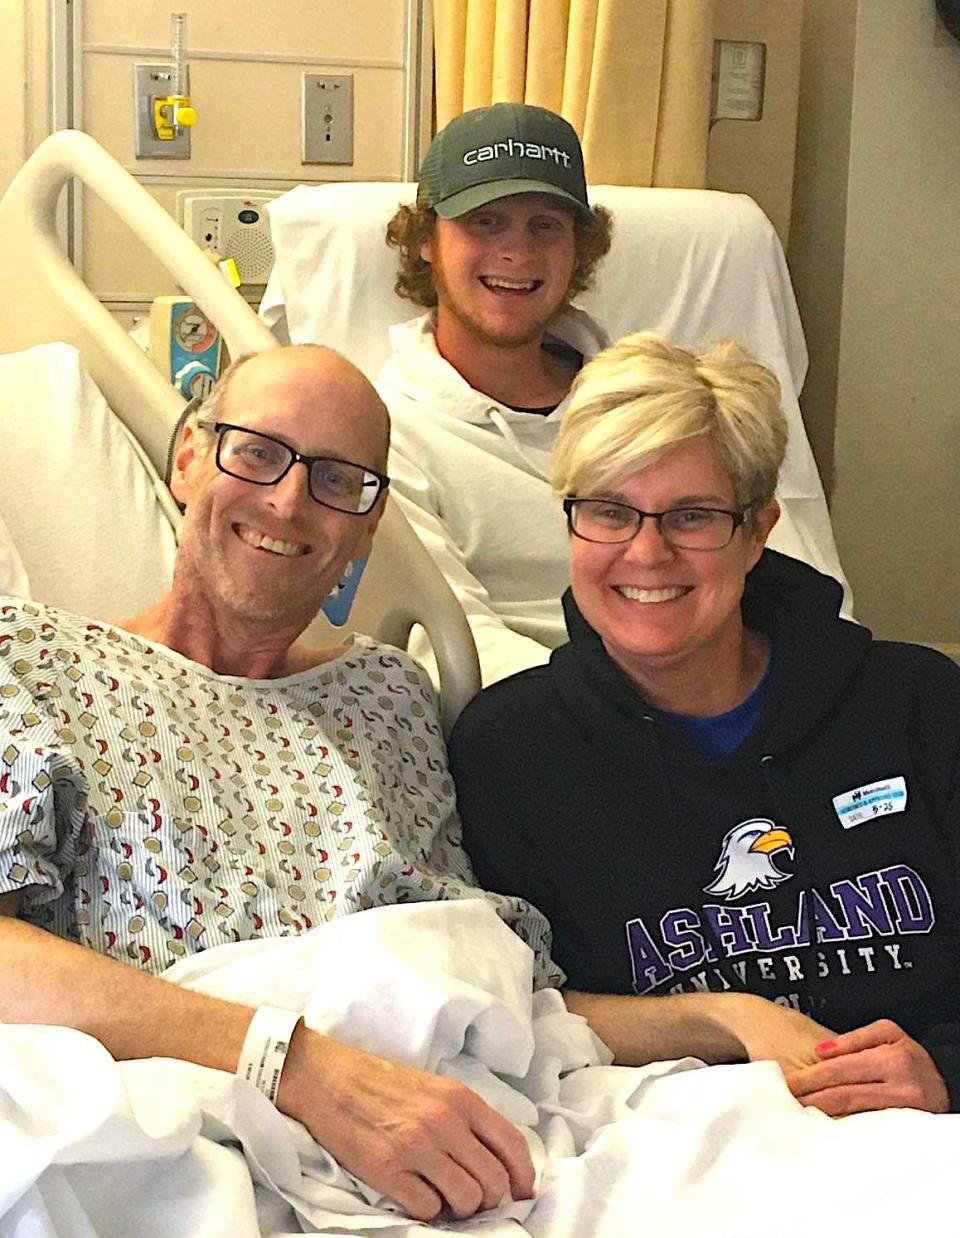 Nevin Mishler, his wife Kari and their son Carter, a member of the Ashland University golf team, share some family time last summer at MetroHealth in Cleveland.